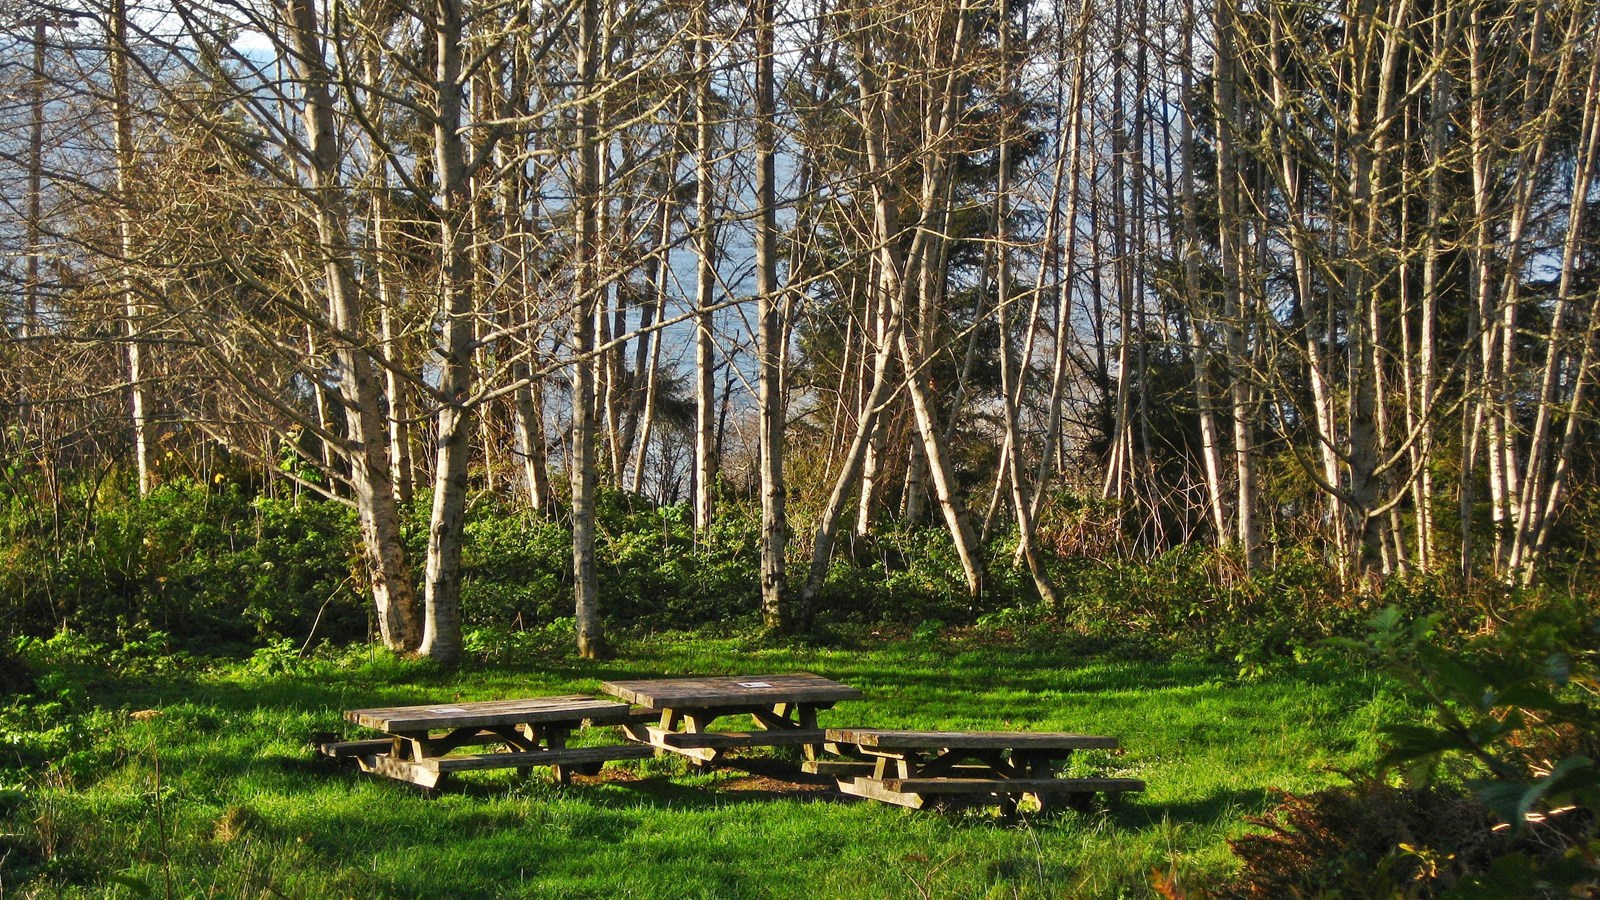 Picnic Tables surrounded by alder trees.